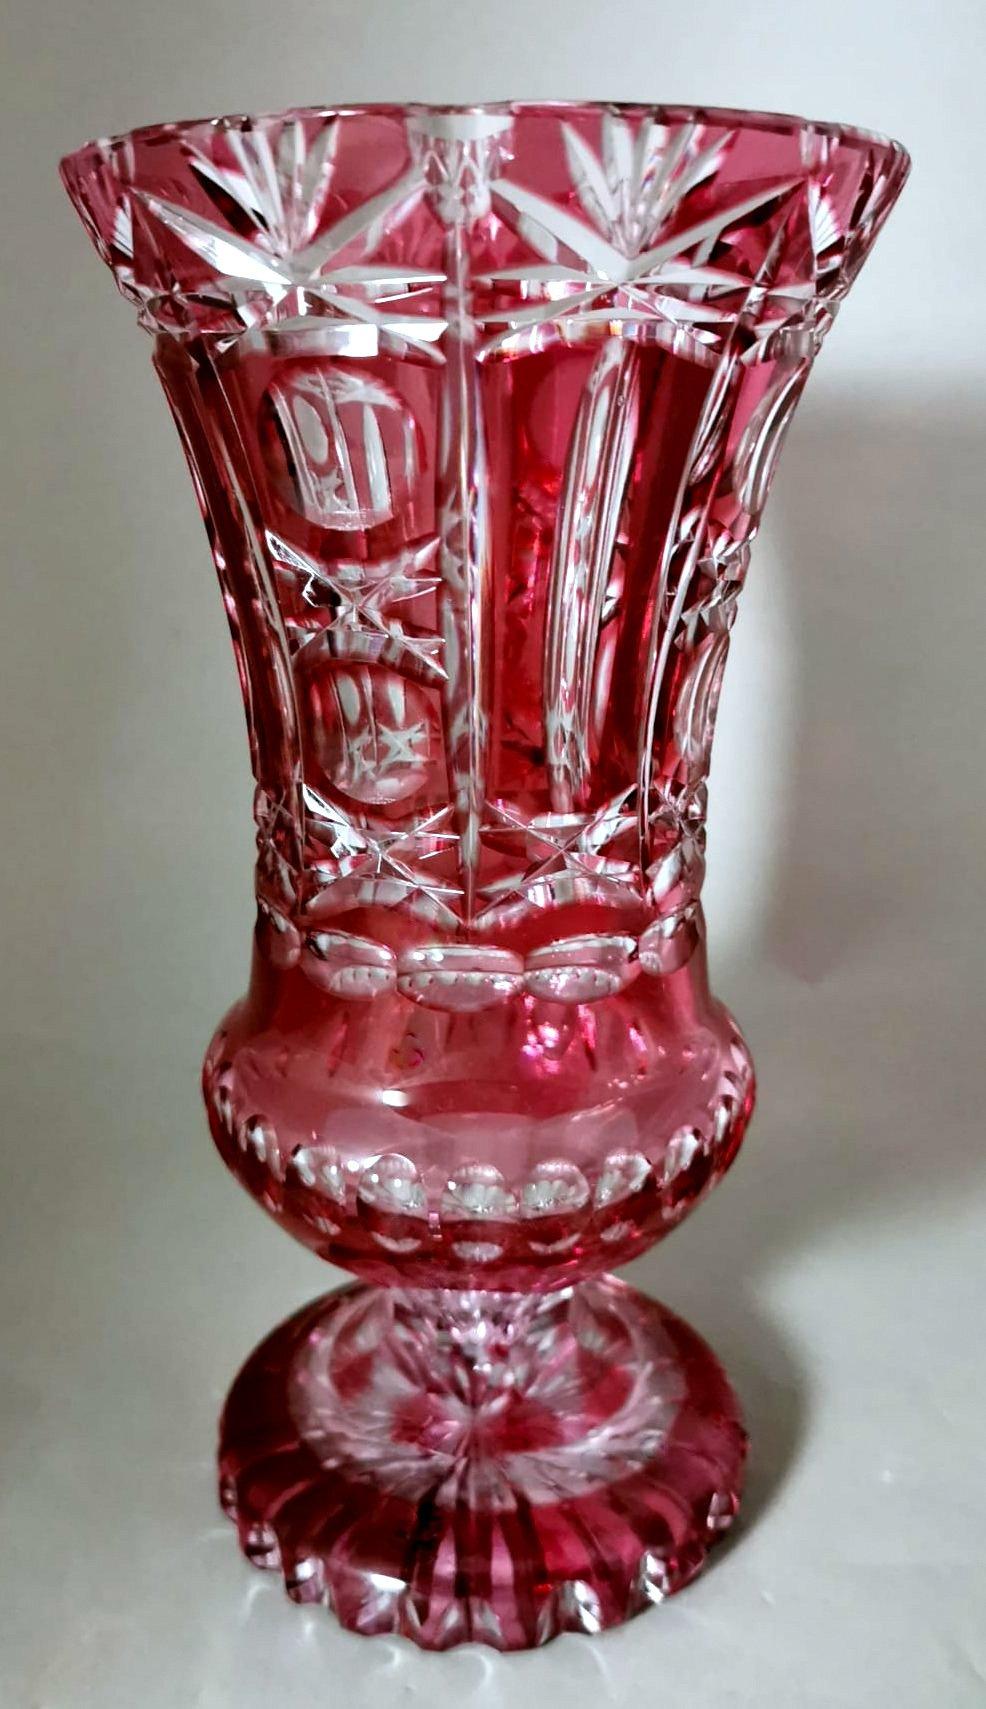 We kindly suggest that you read the entire description, as with it we try to give you detailed technical and historical information to ensure the authenticity of our objects.
Delightful and heavy red crystal vase; made between 1950 and 1955 in